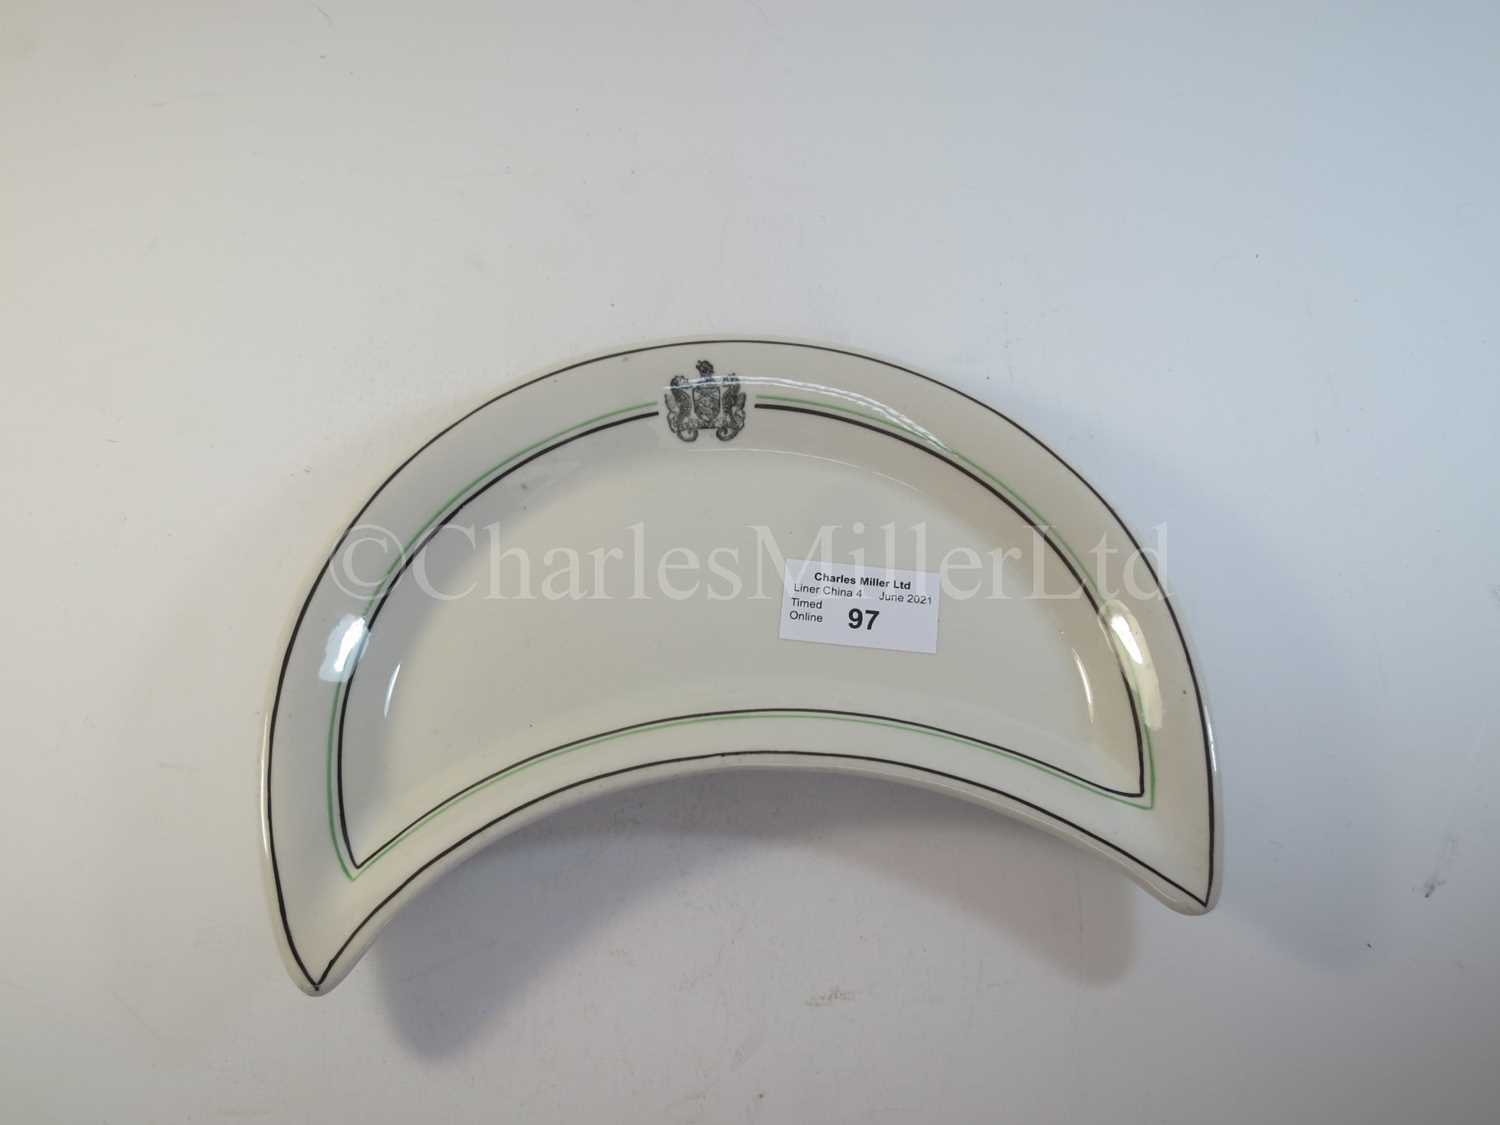 Lot 97 - A Royal Mail Line crescent side plate -- 8½in. (21.5cm) wide